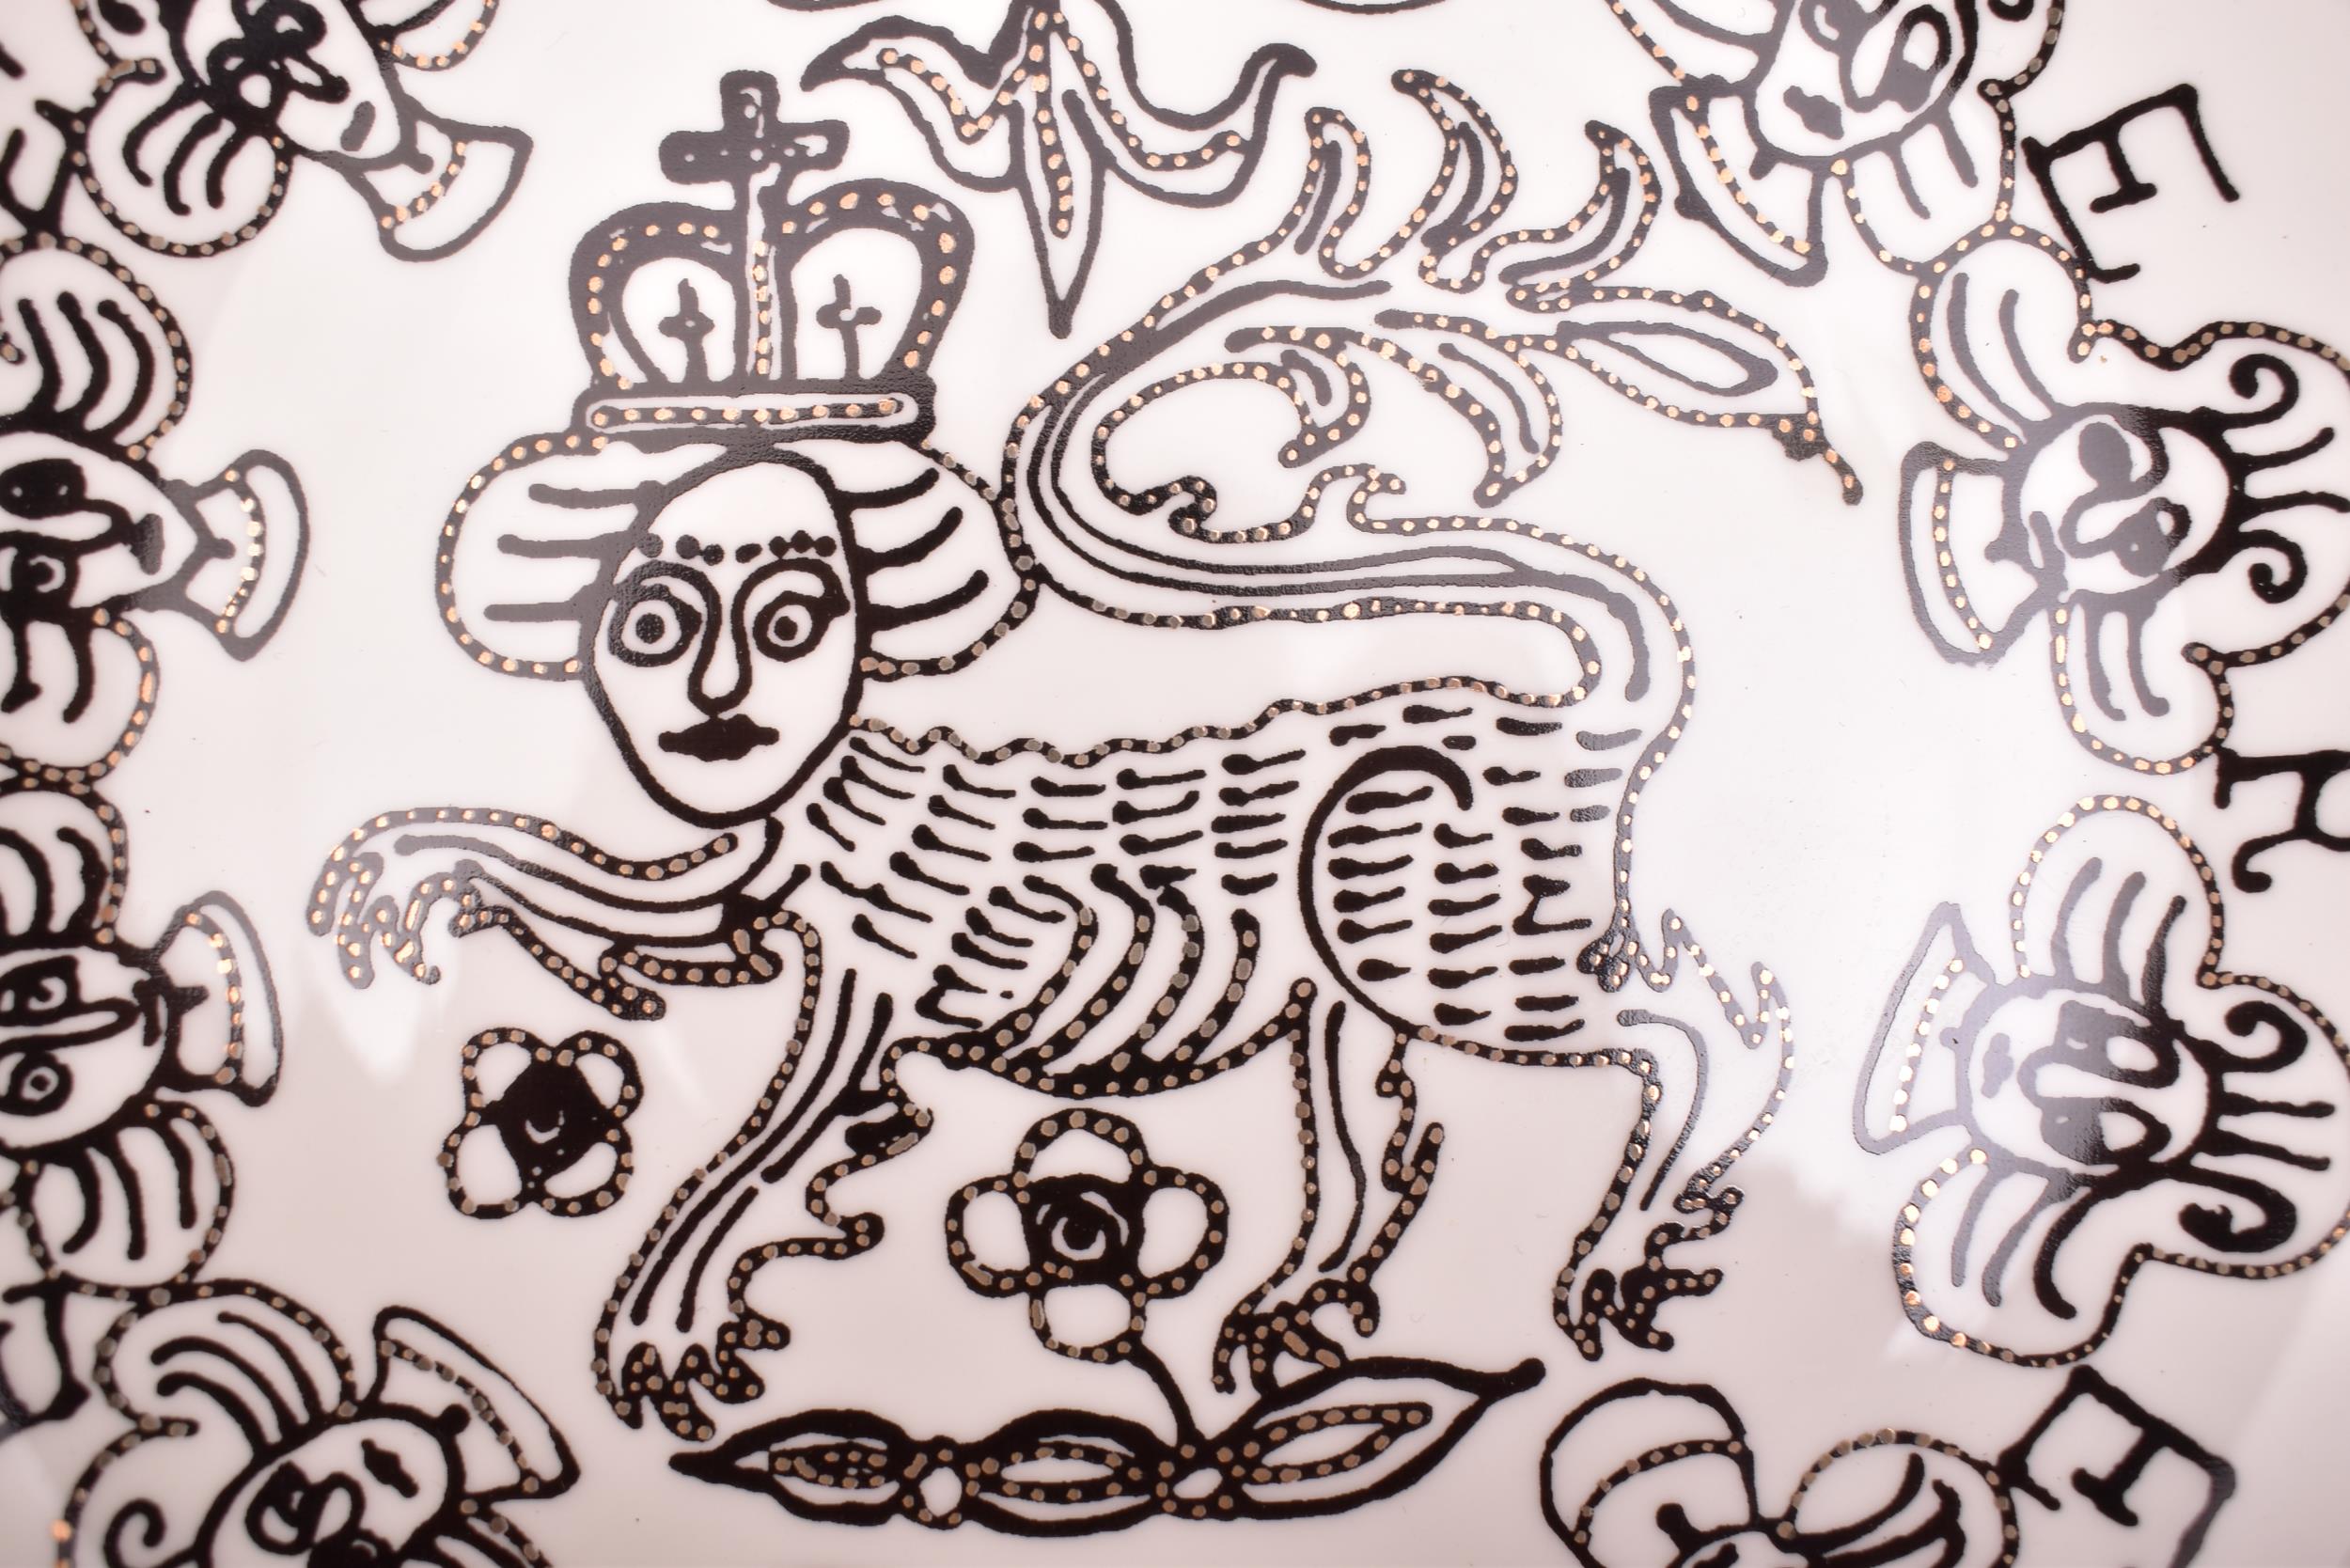 GRAYSON PERRY (B. 1960) - THE LION QUEEN - Image 2 of 3